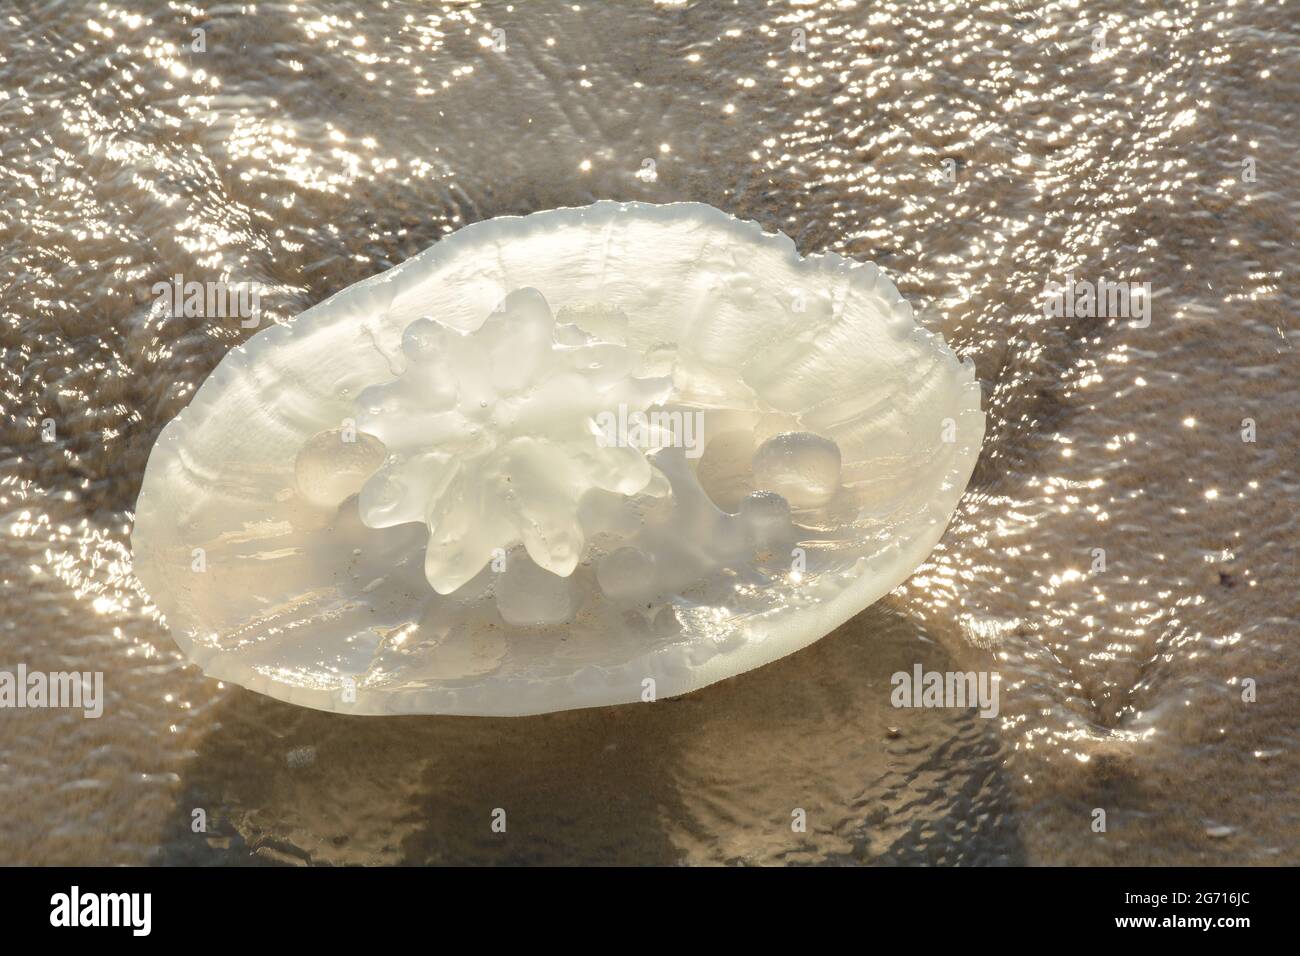 Rhopilema nomadica jellyfish at the Mediterranean seacoast.  Vermicular filaments with venomous stinging cells  can cause painful injuries to people. Stock Photo